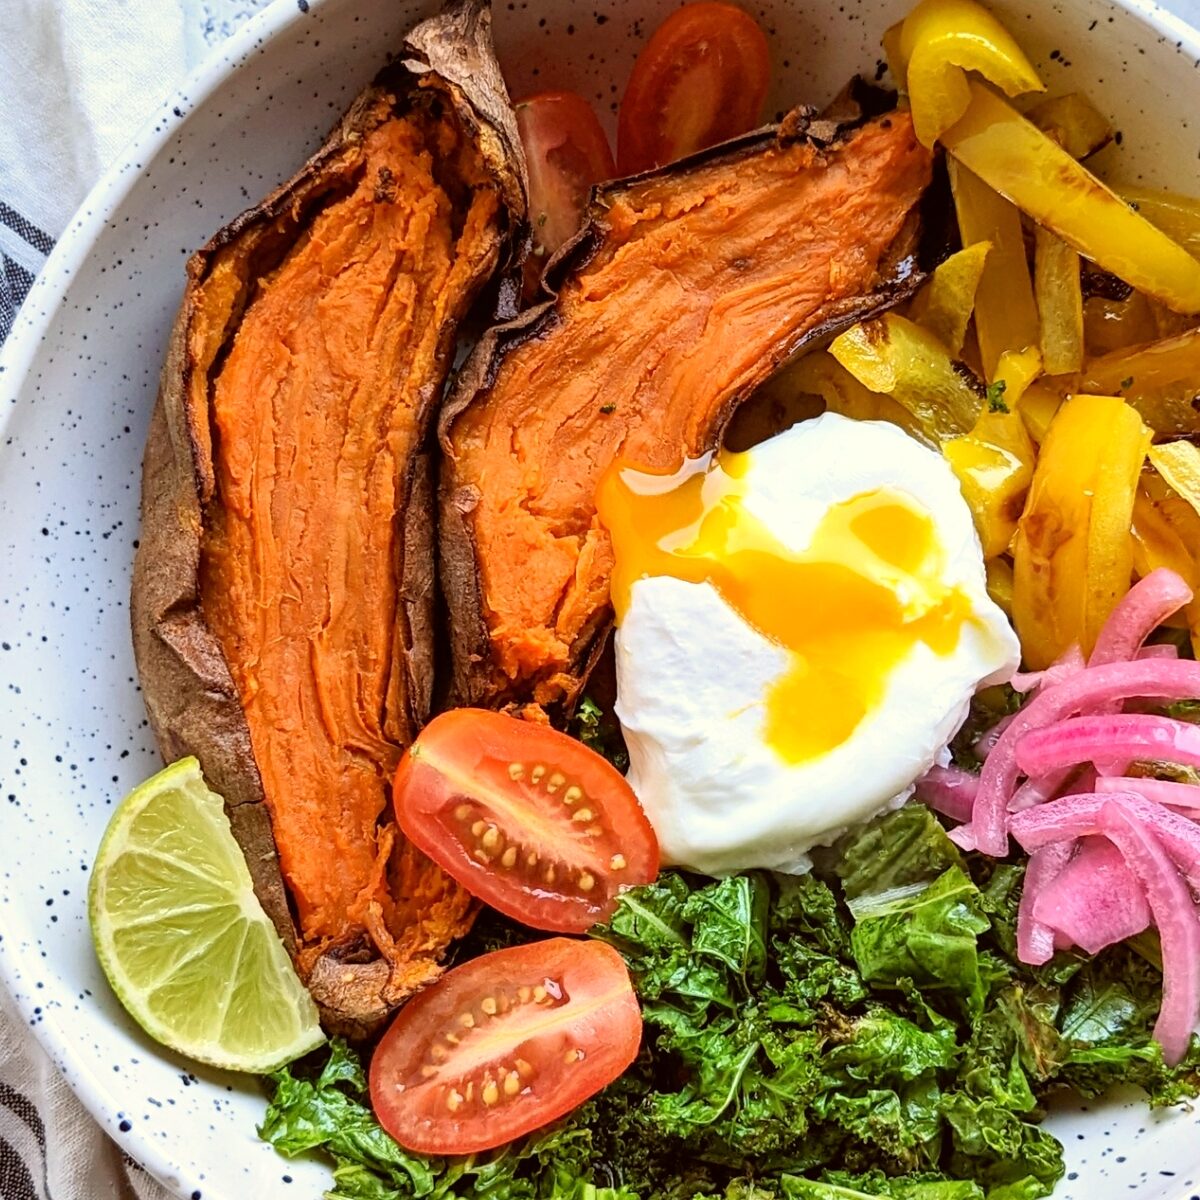 sweet potato brunch recipes healthy roasted vegetable breakfast bowl gluten free clean eating bowls recipes.